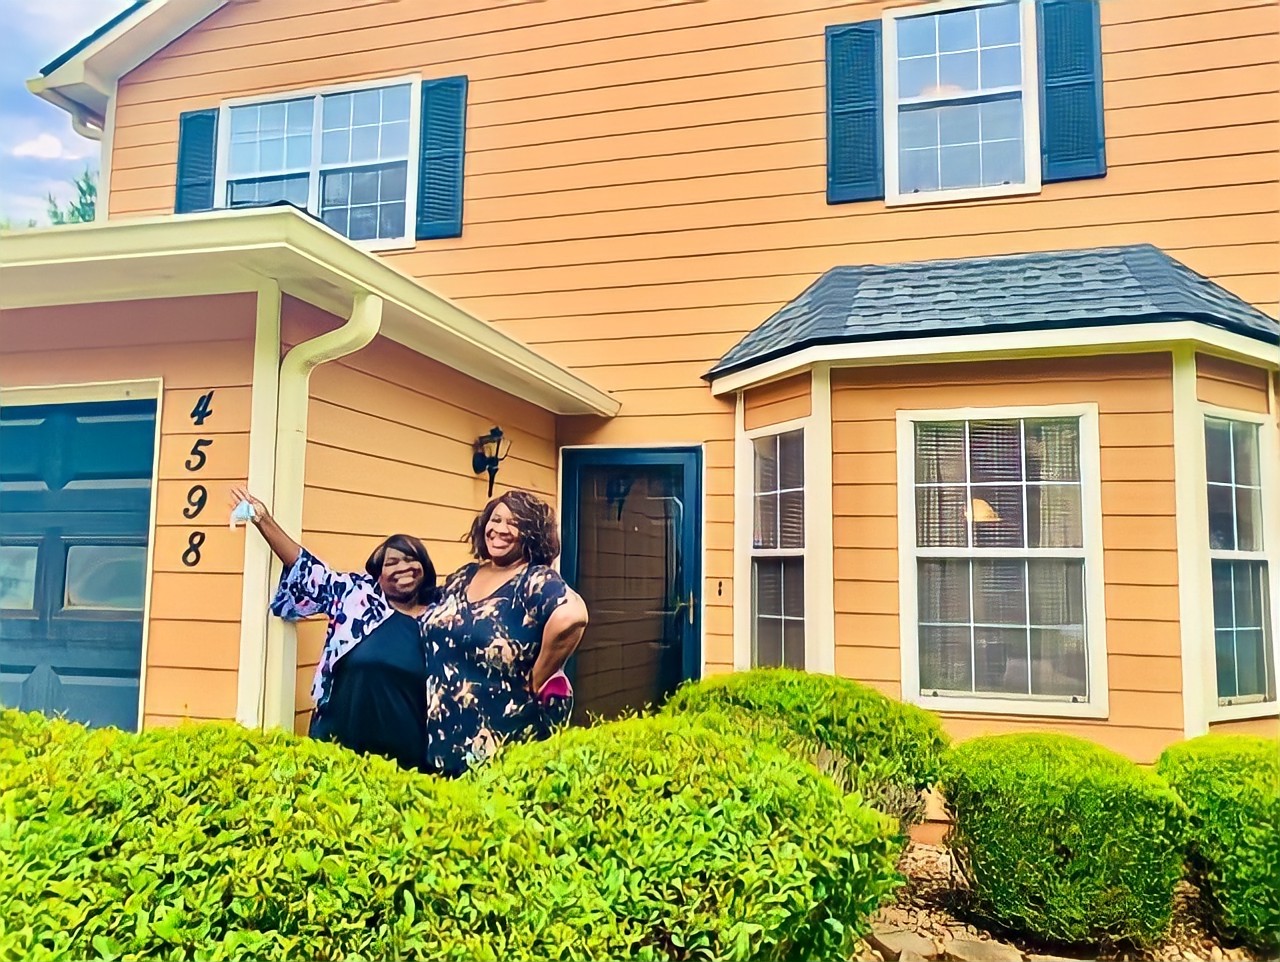 Anita James (left) and her daughter (right) smile brightly in front of their new home.